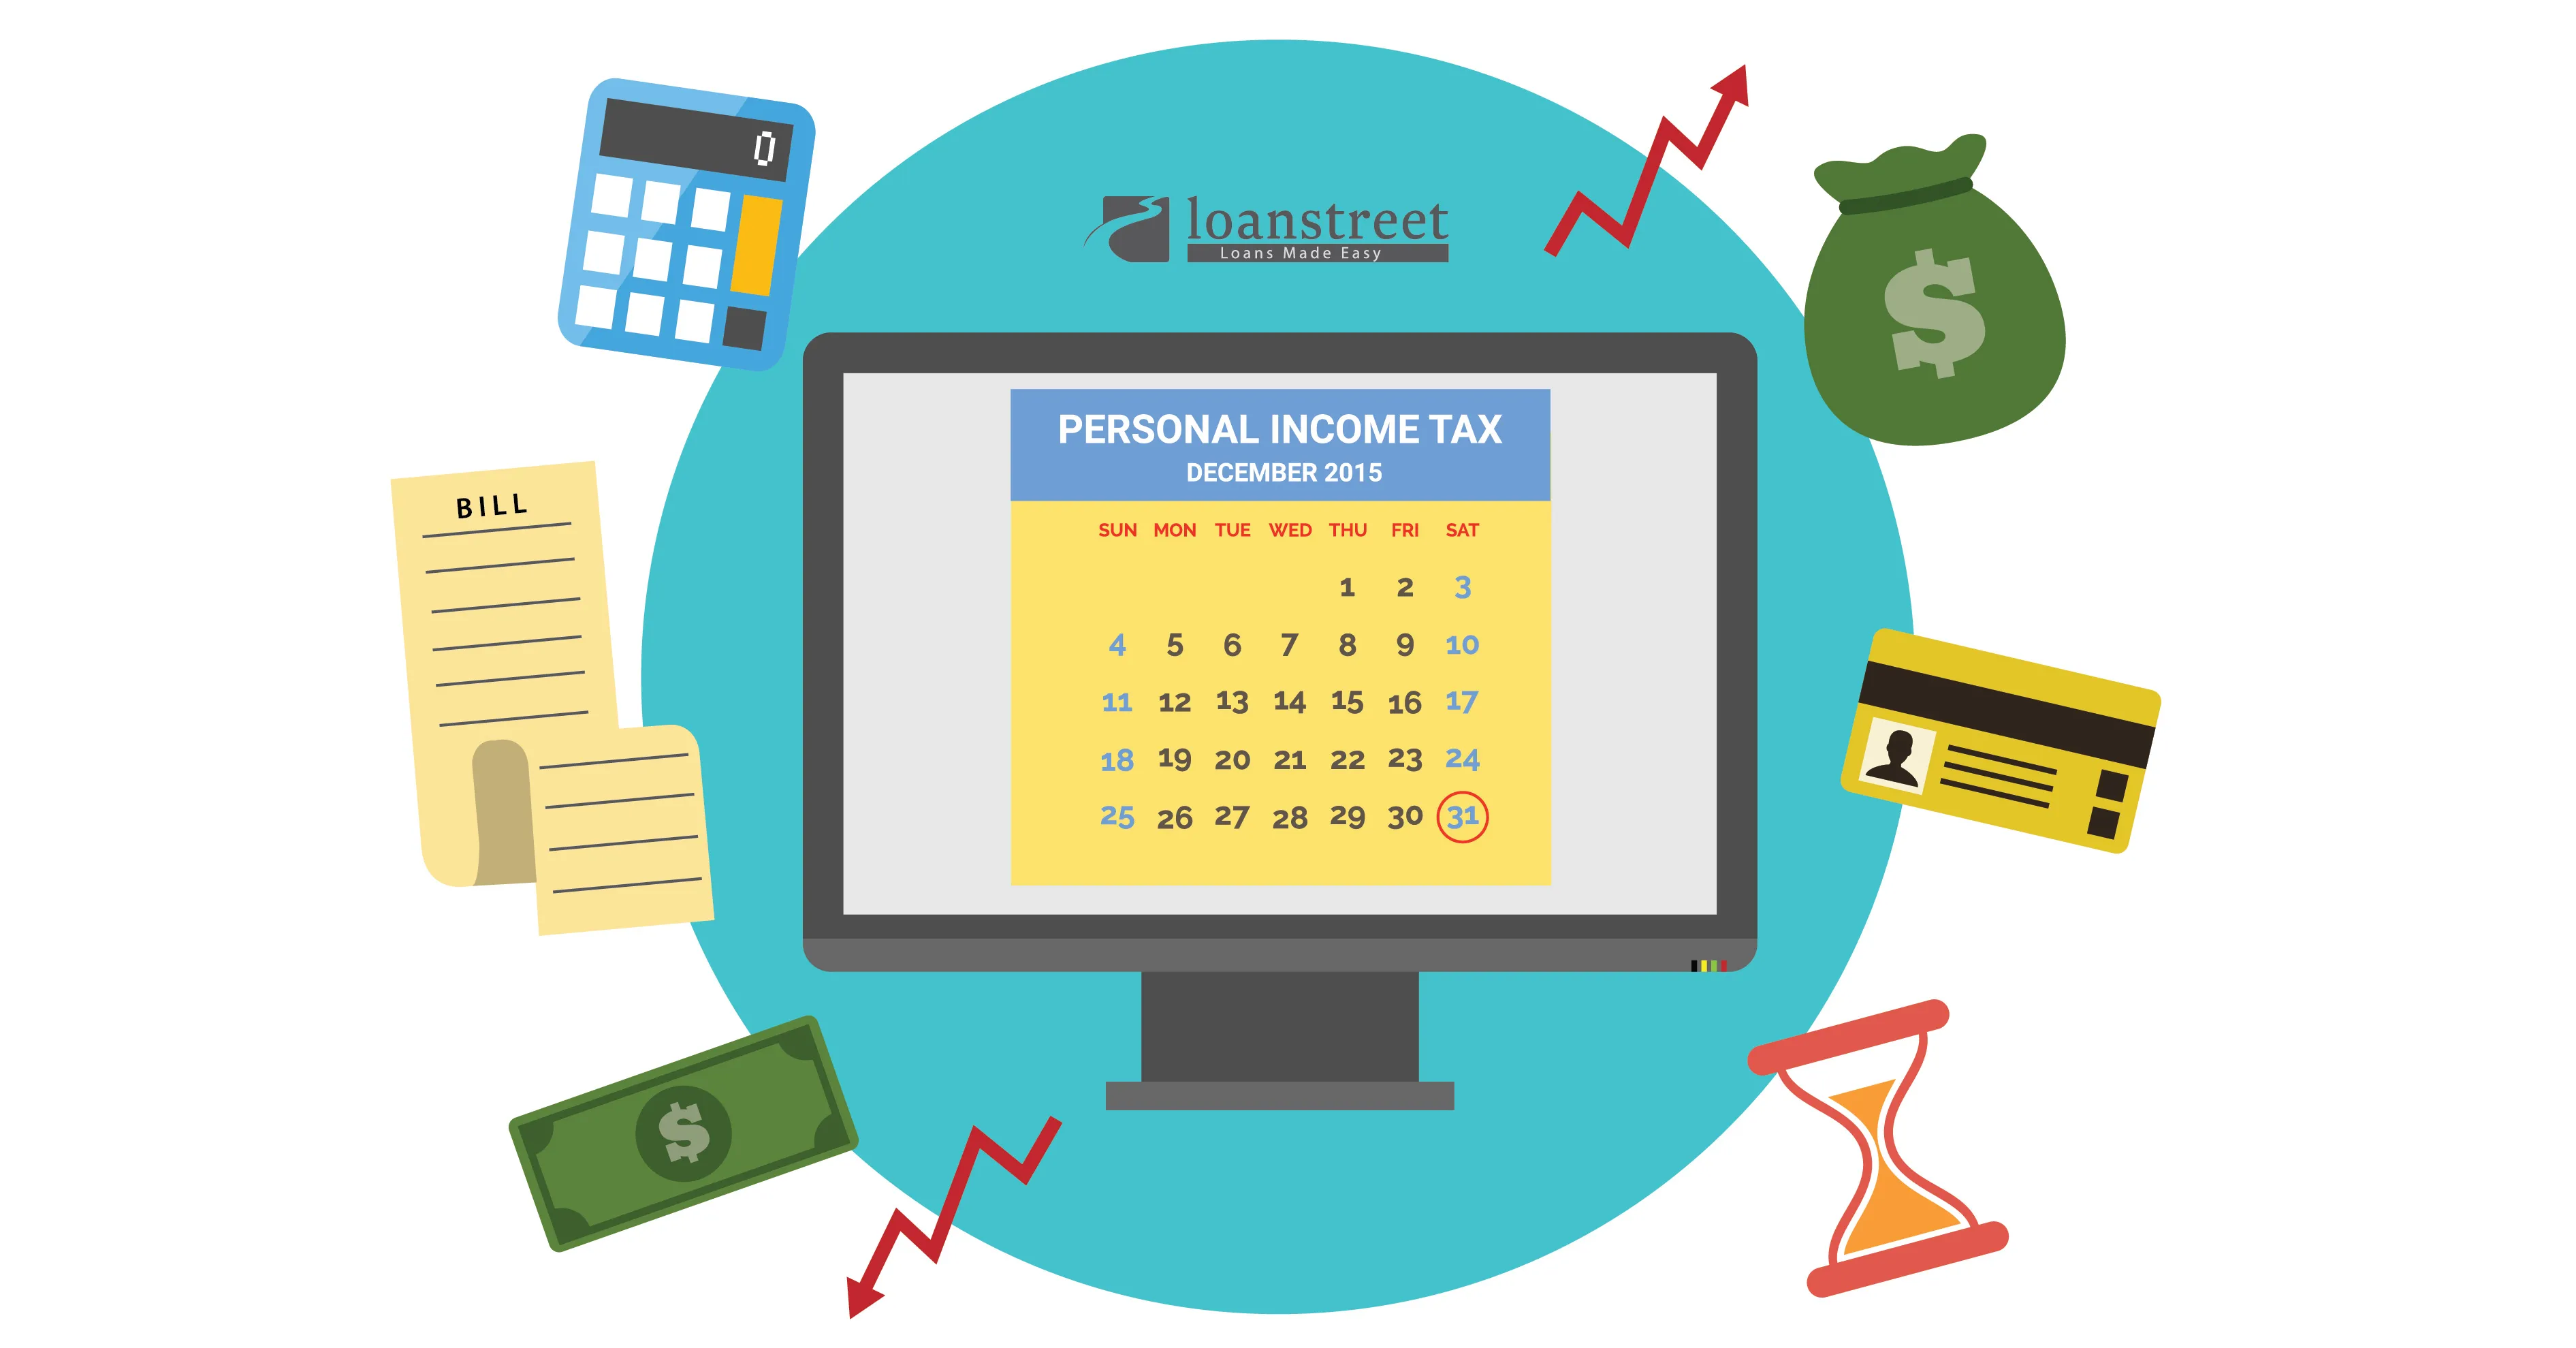 What is the personal income tax